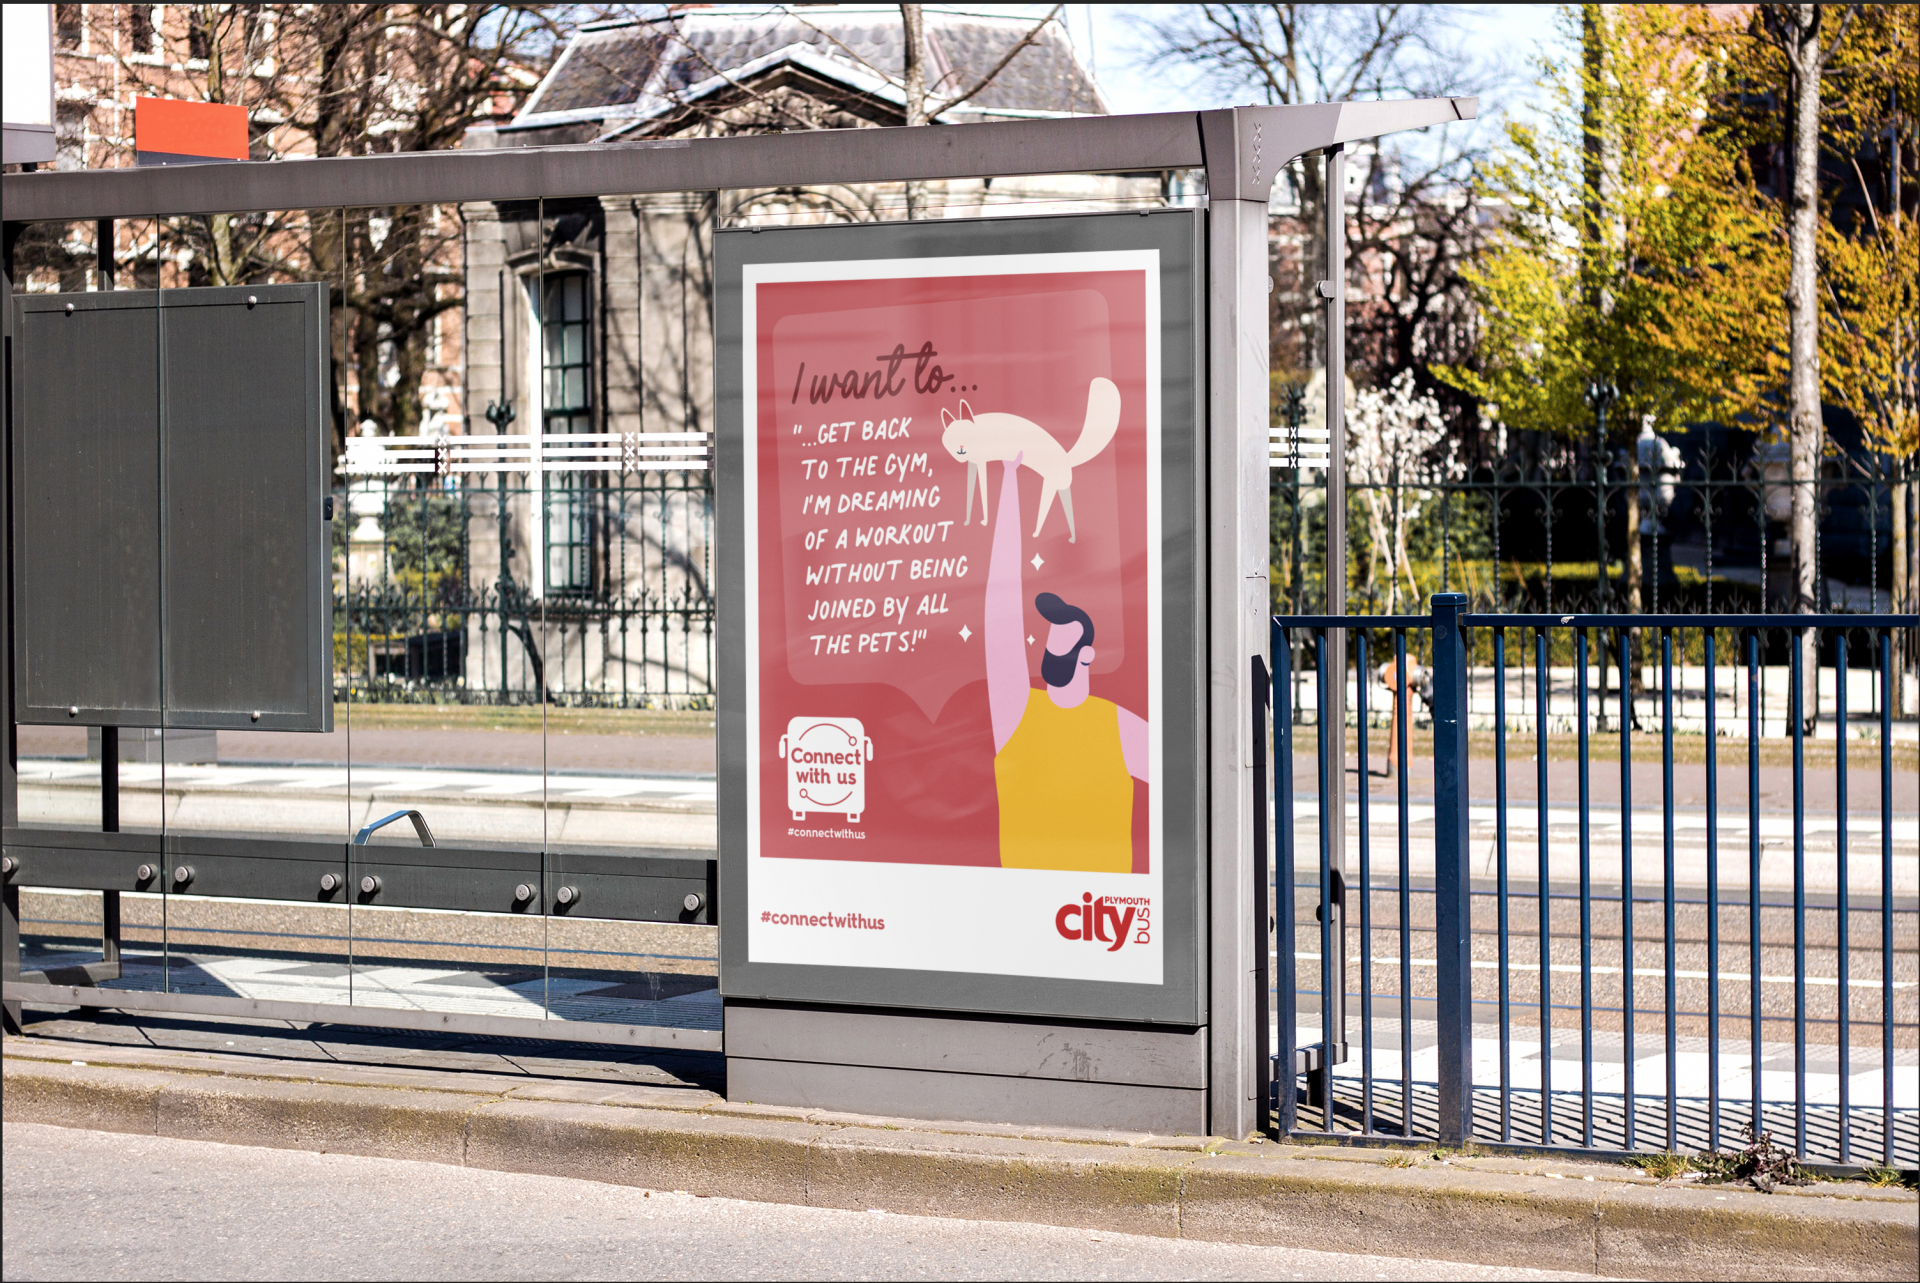 plymouth citybus connect with us campaign poster